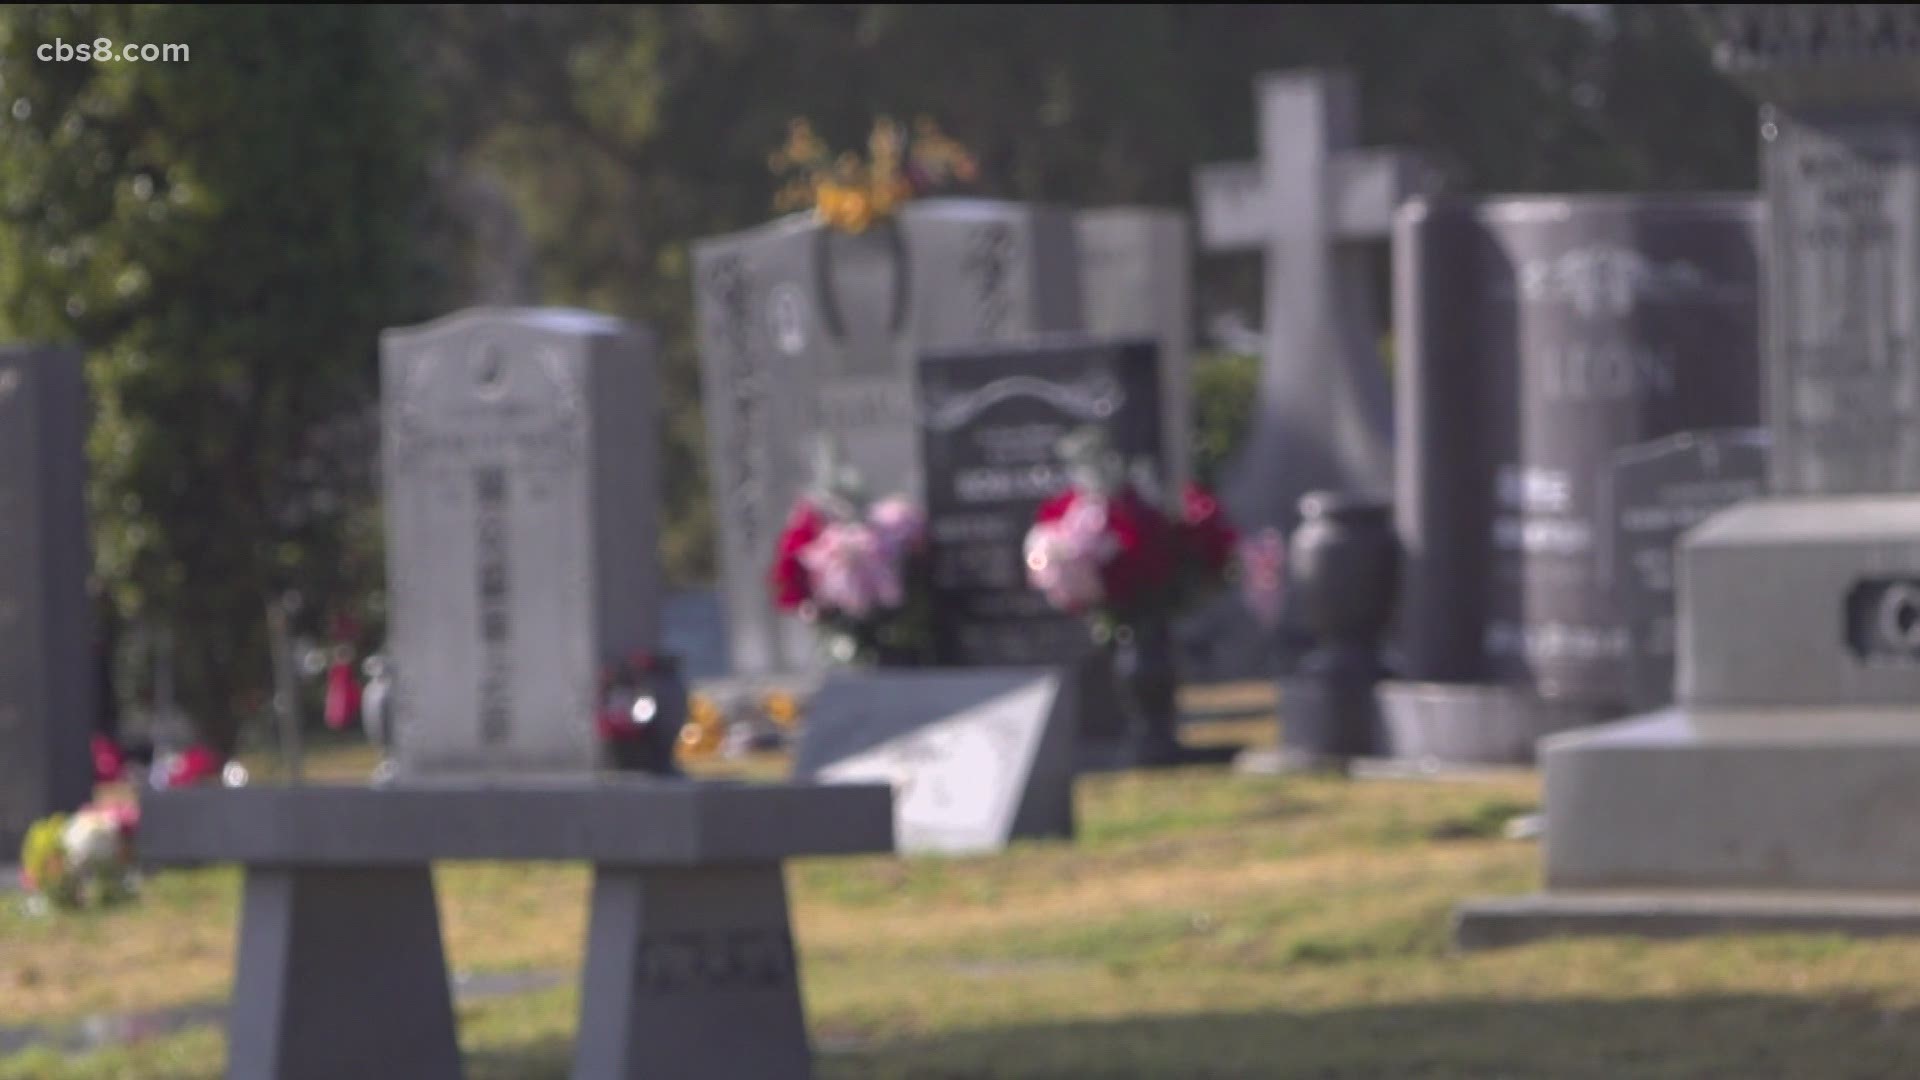 Not only are mortuaries running out of space, but being able to even plan a funeral has been put on hold as well across Southern California.